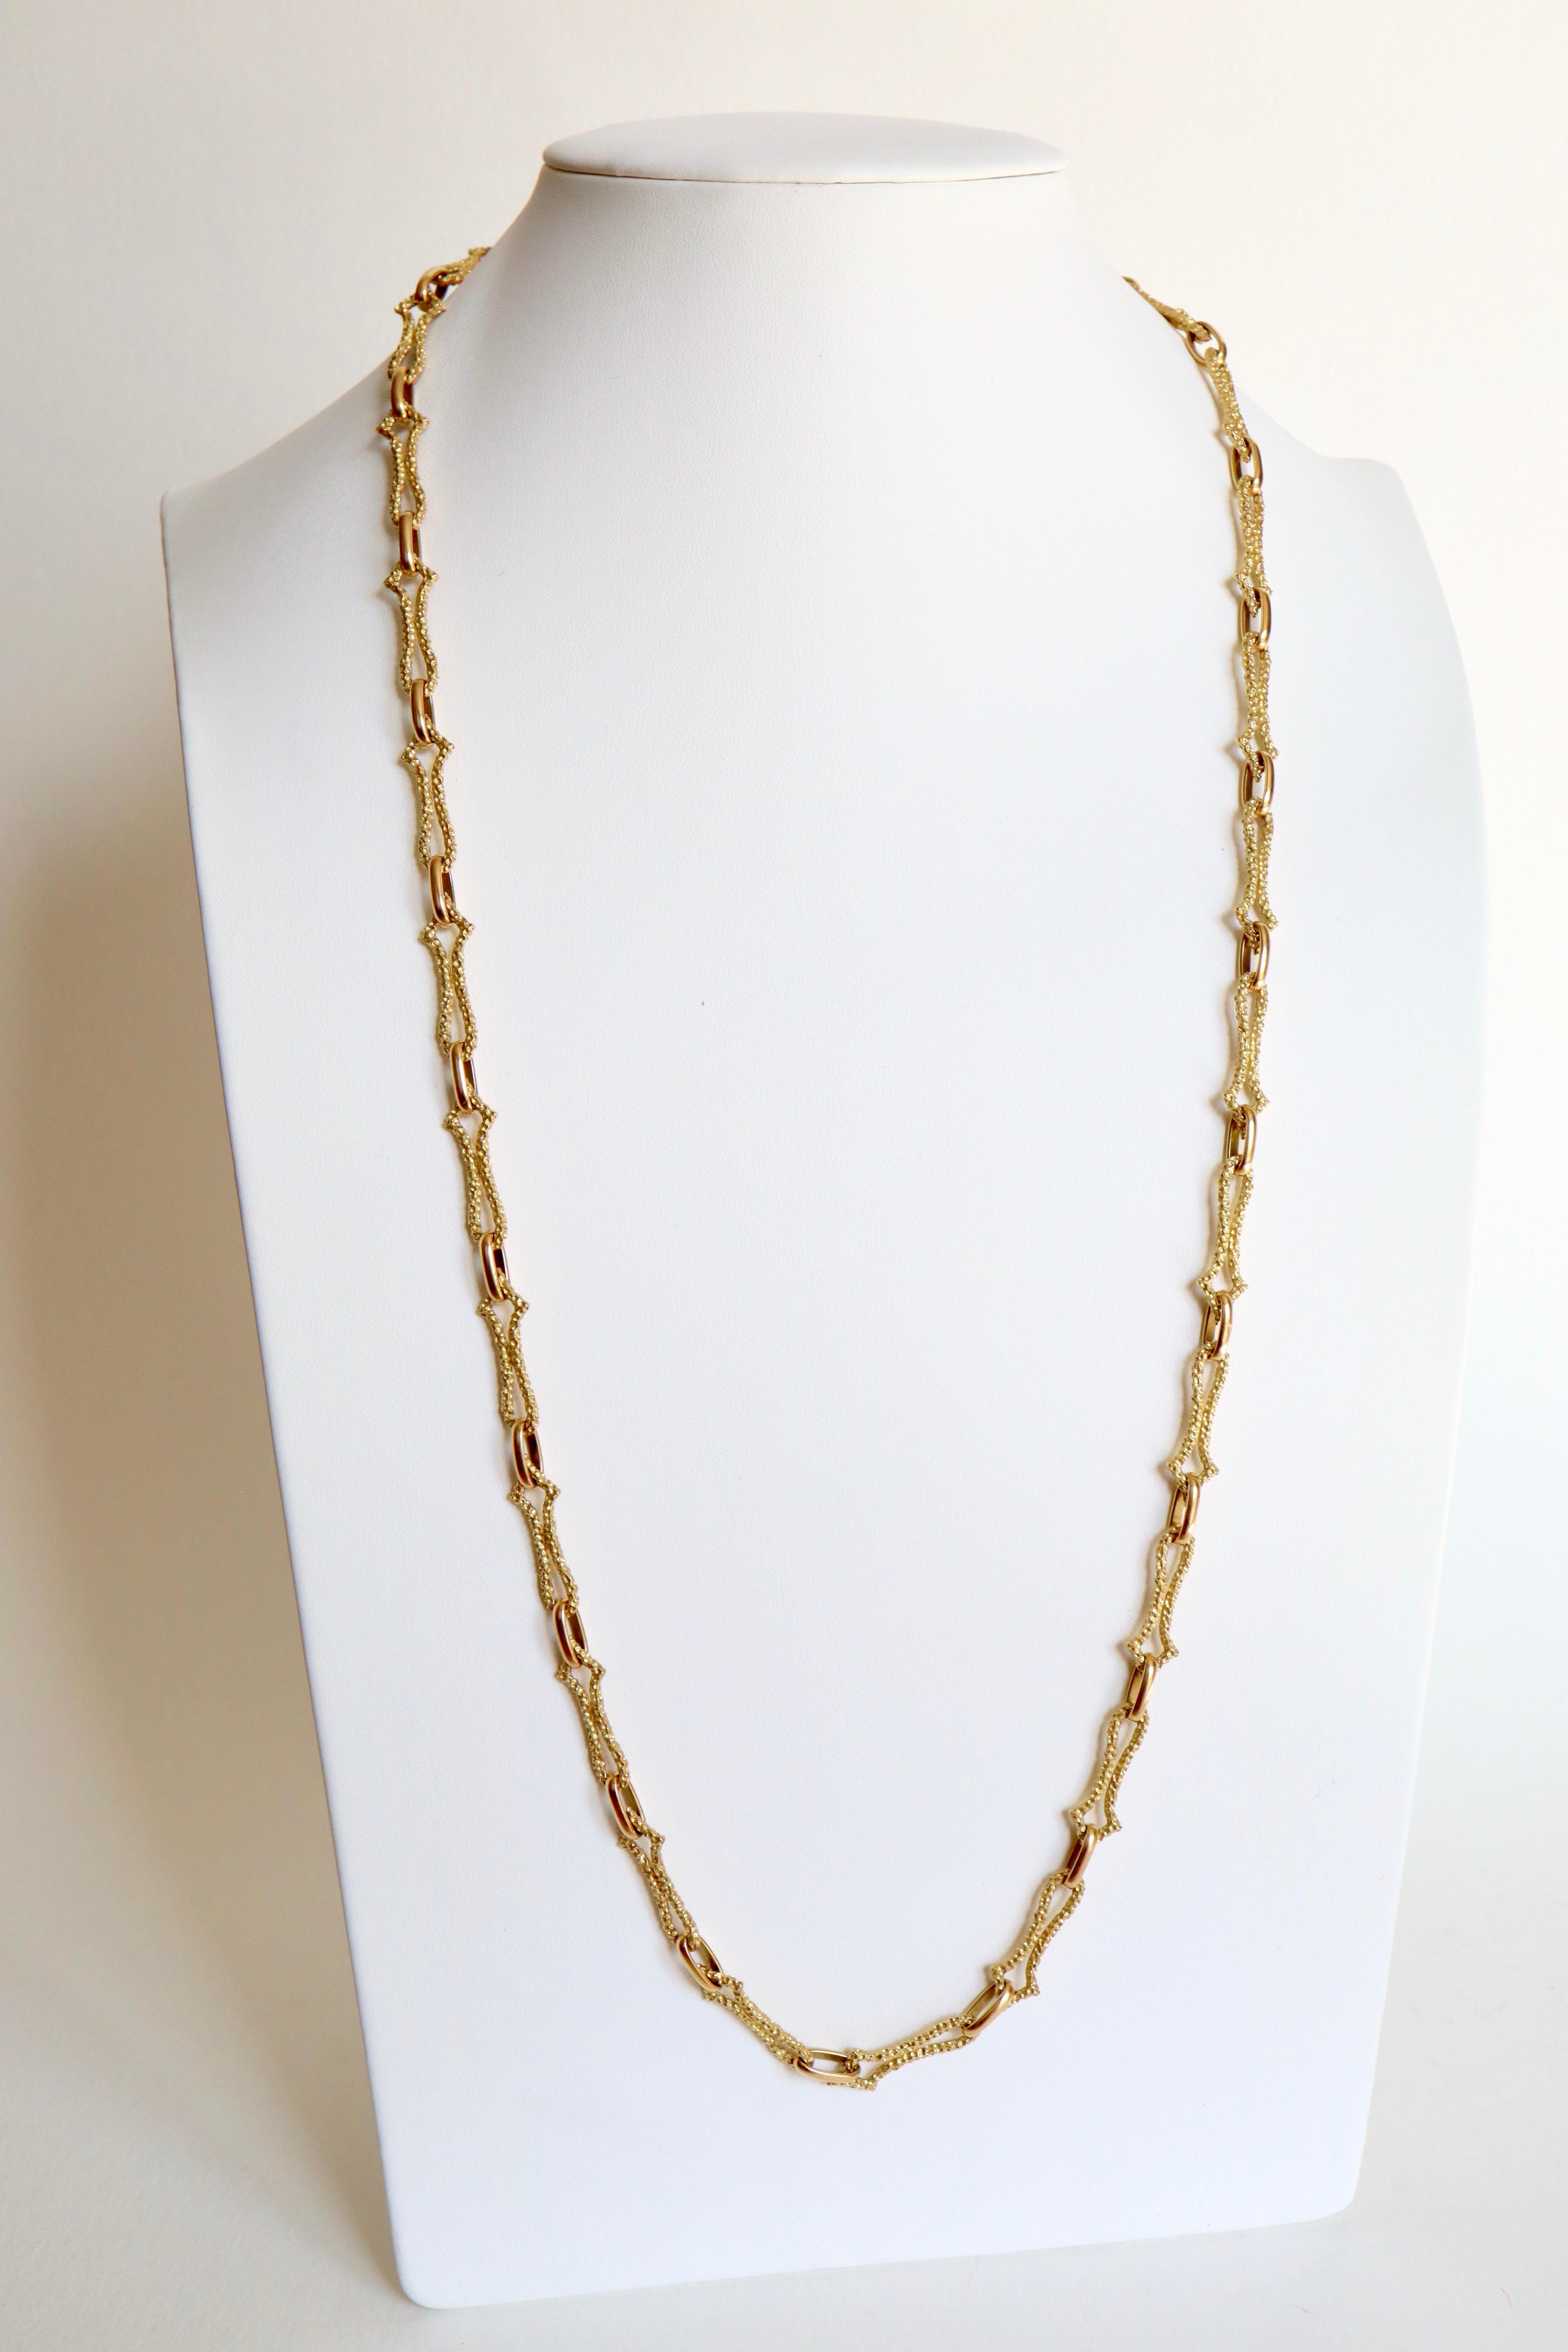 18K Yellow Gold Boucheron Long Necklace Knuckles in hammered Gold retained by Passers in smooth Yellow Gold.
Gross weight: 73.8 g Length: 84 cm Width 0.9 cm
